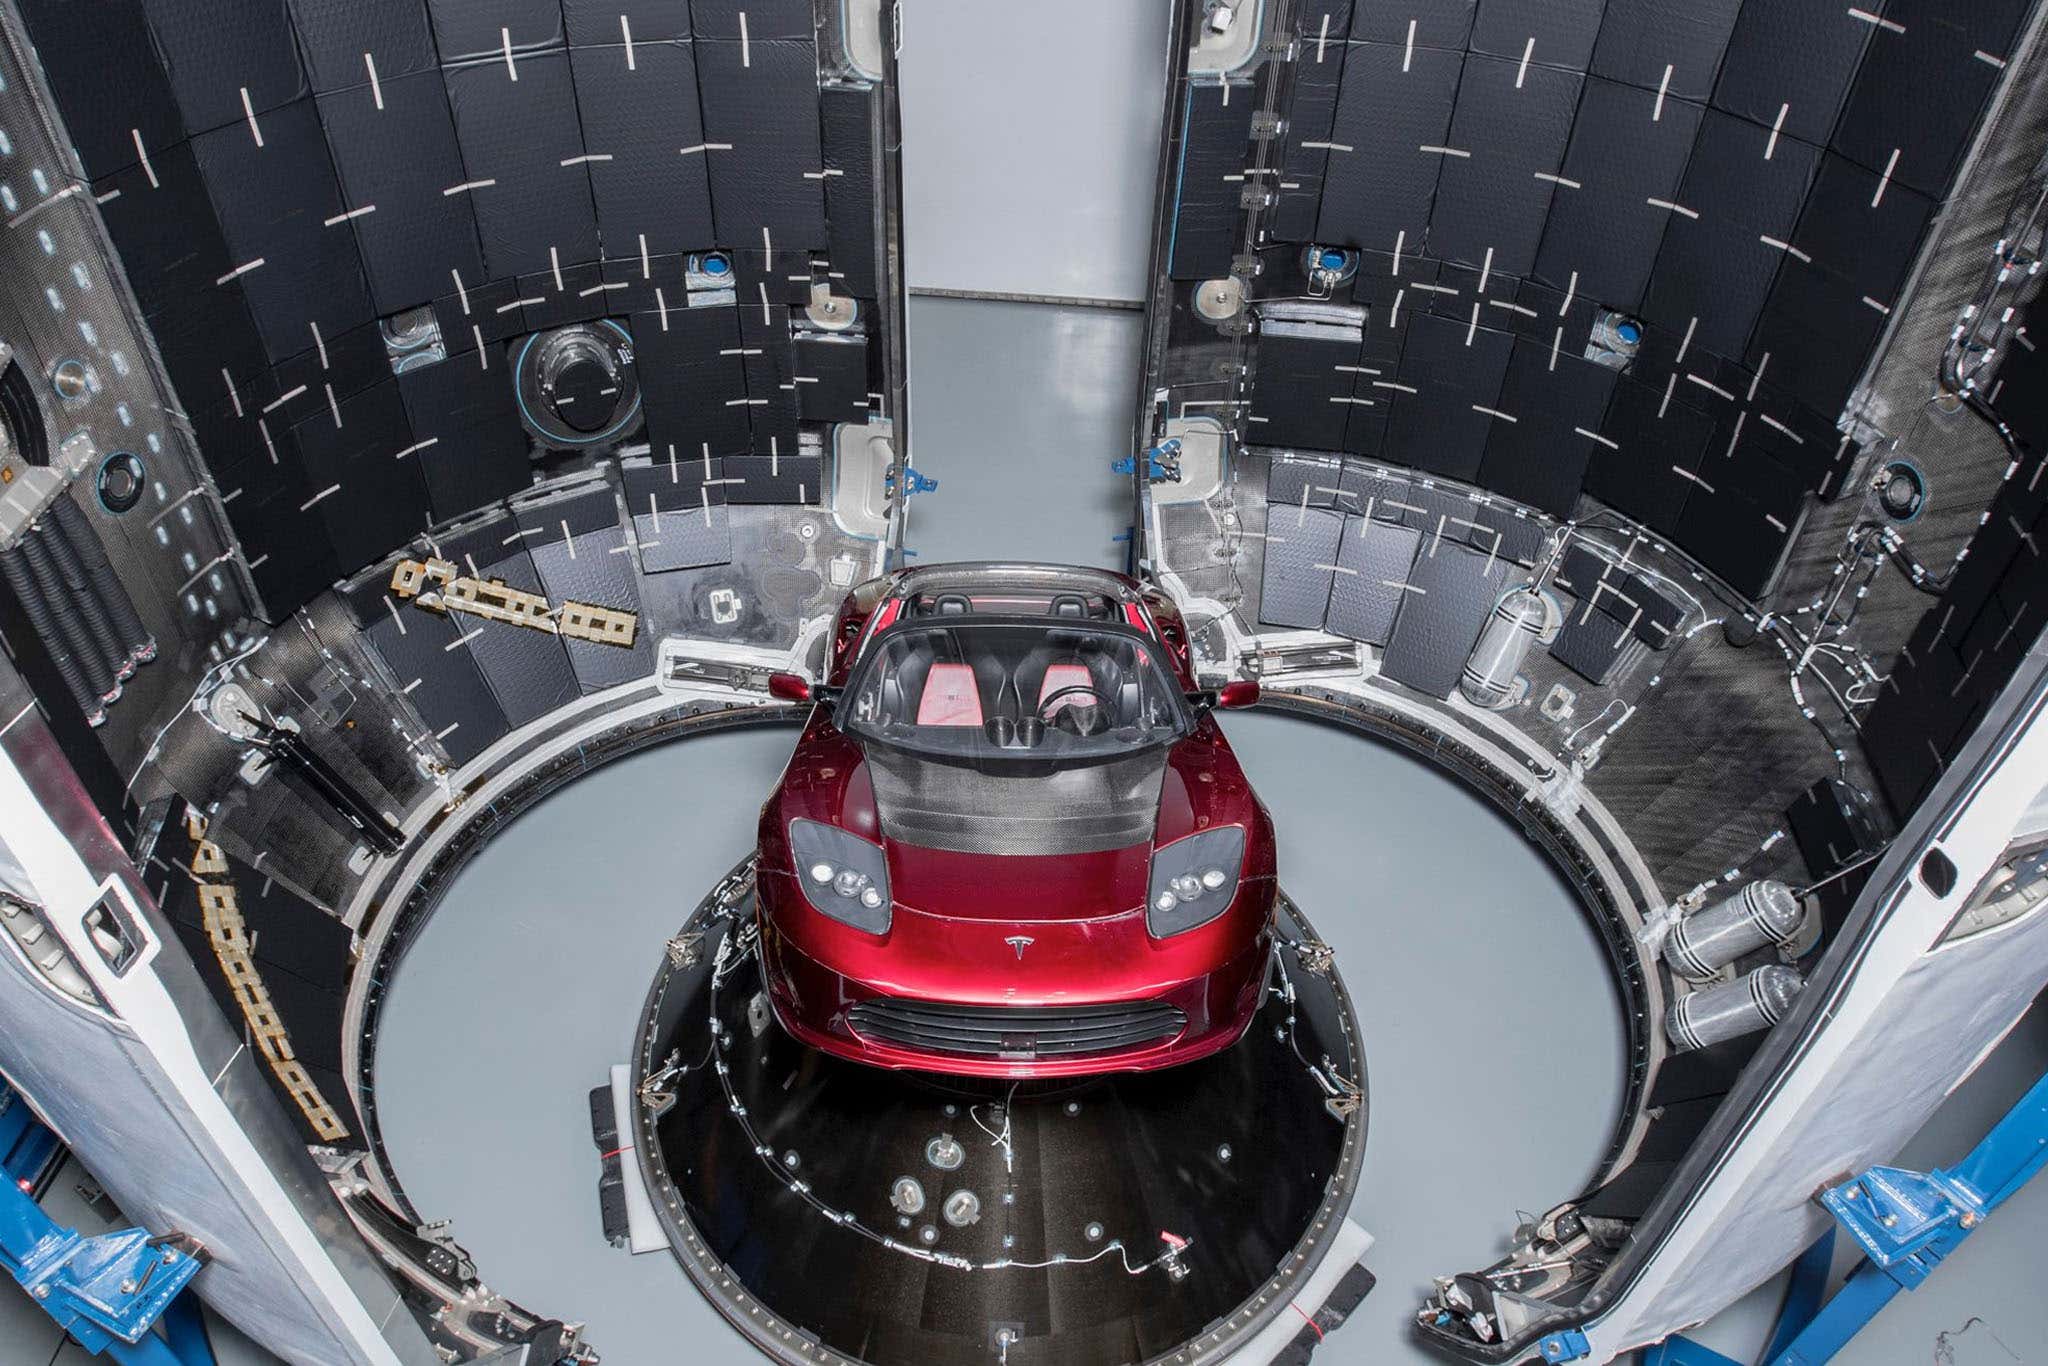 Red Tesla Roadster being loaded into a rocket capsule during Elon Musk's SpaceX launch in 2018